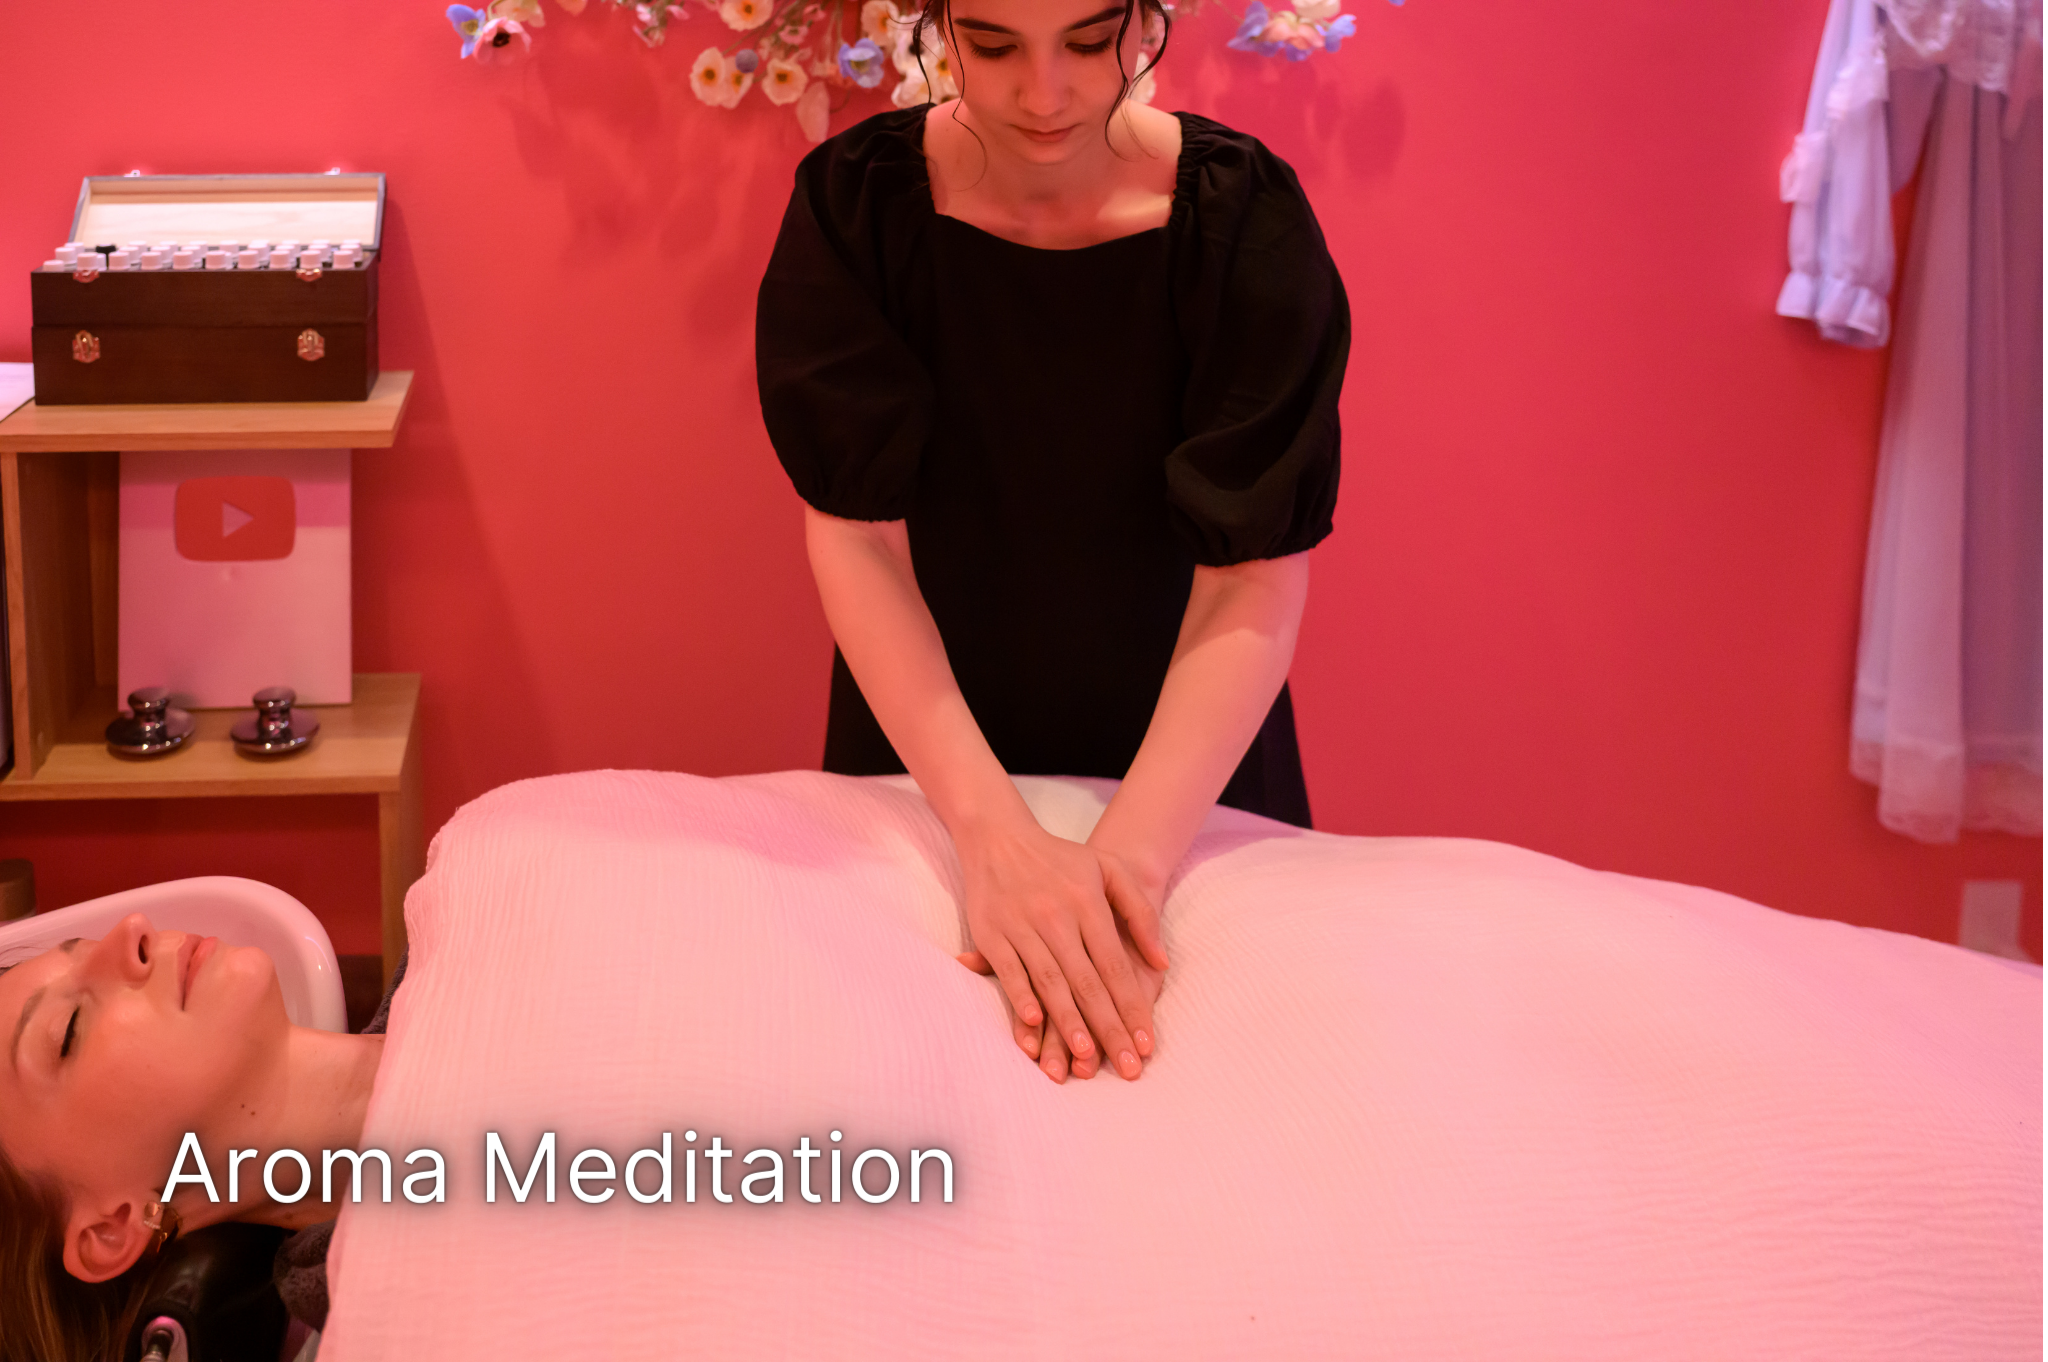 OMAKASE PREMIUM HEAD SPA EXPERIENCE 2,5HOURS IN ICONIC PINK ROOM